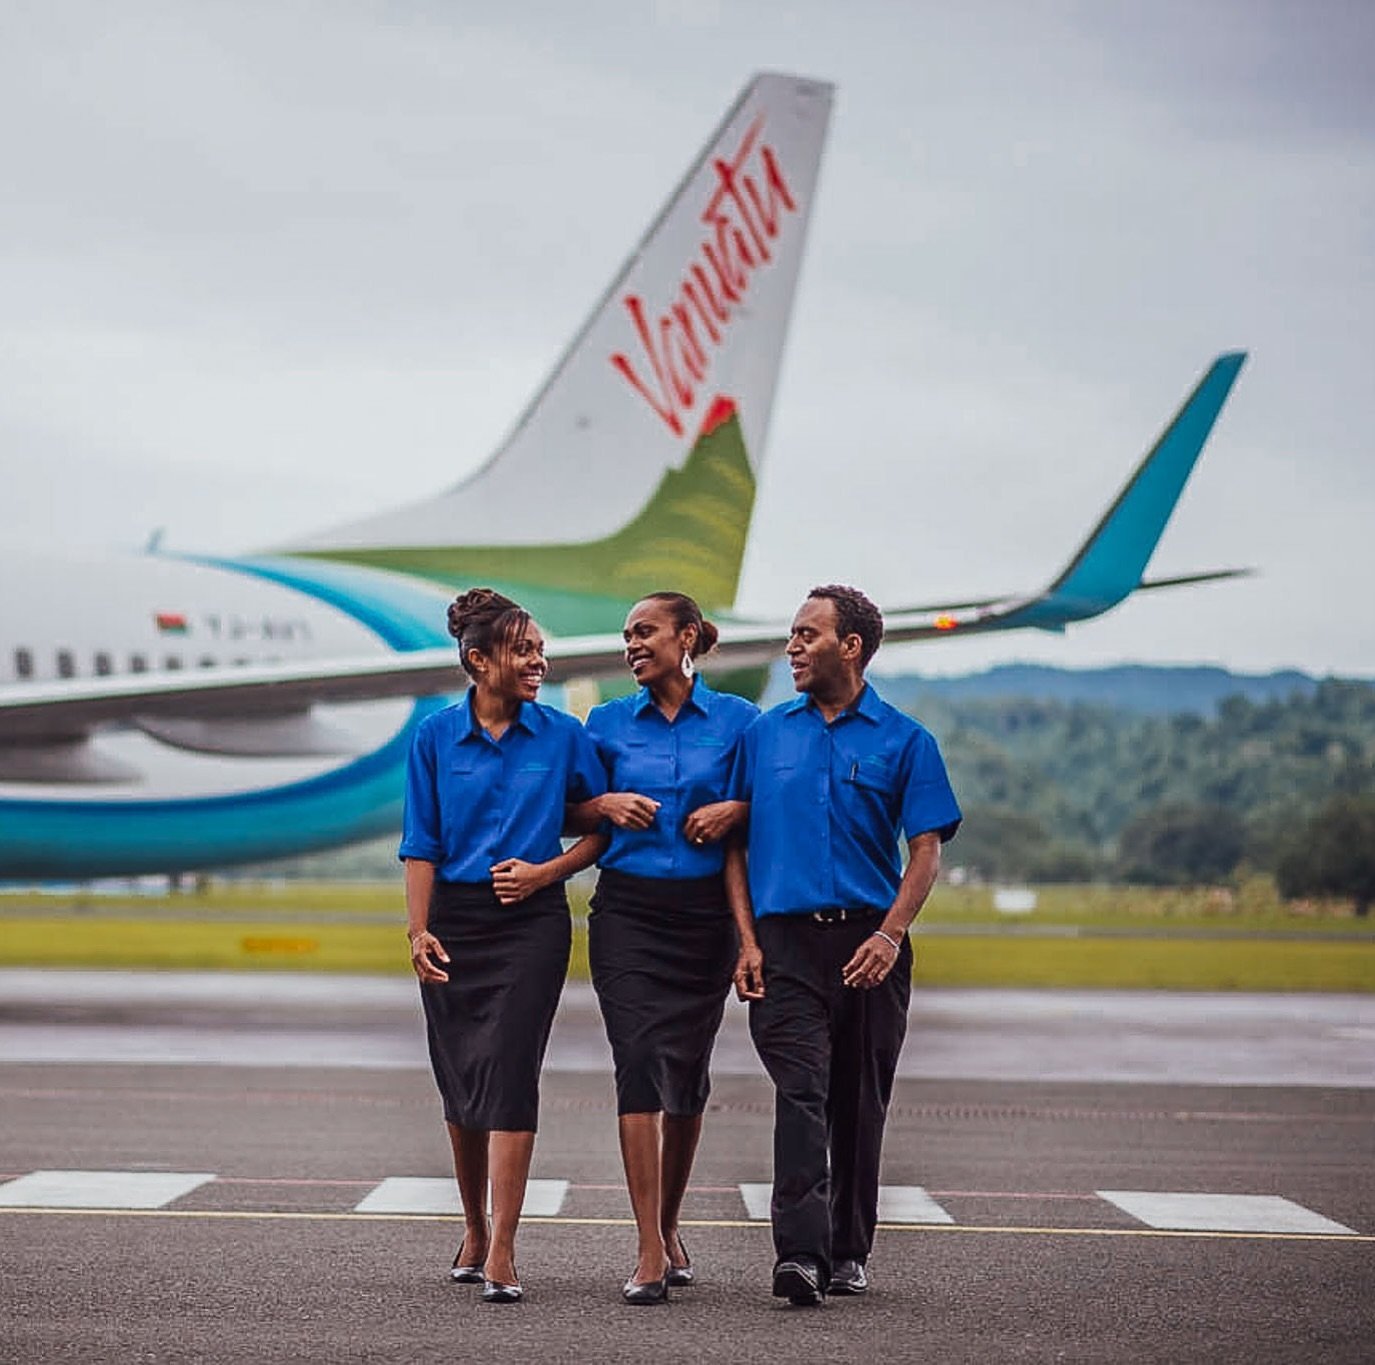 After years and years of complaining about how the airlines is affecting the Vanuatu tourism industry (we ourselves were avoiding at all costs flying internationally with that airline, and always made sure to gave a few free days around our trips to 